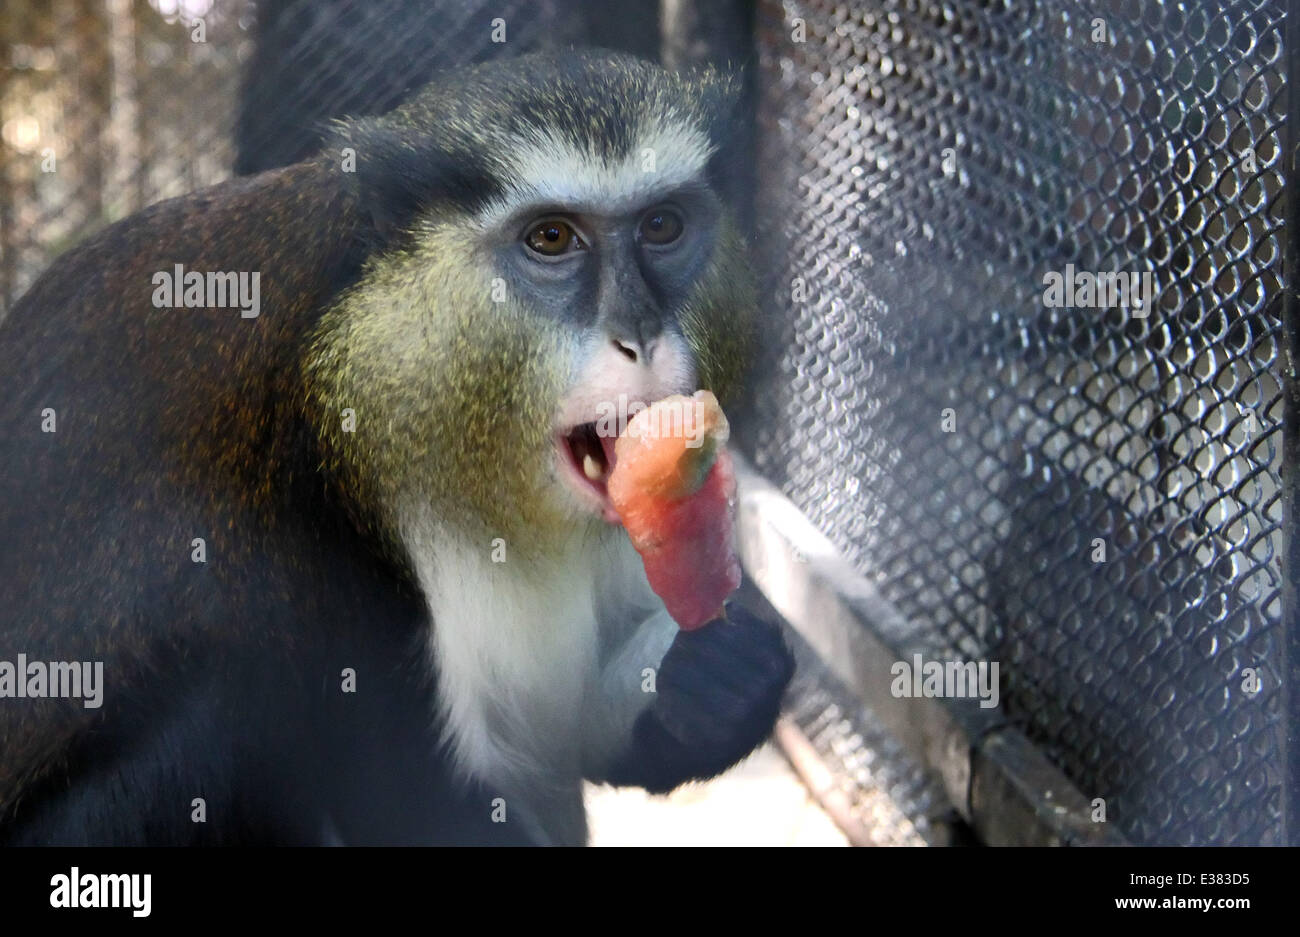 A monkey enjoys a specially made ice-lolly at a zoo in Varna, Bulgaria. Over the last few weeks temperatures in Bulgaria hit a record 39 degrees celsius (102.2 Fahrenheit).  Where: Varna, Bulgaria When: 09 Aug 2013 Stock Photo